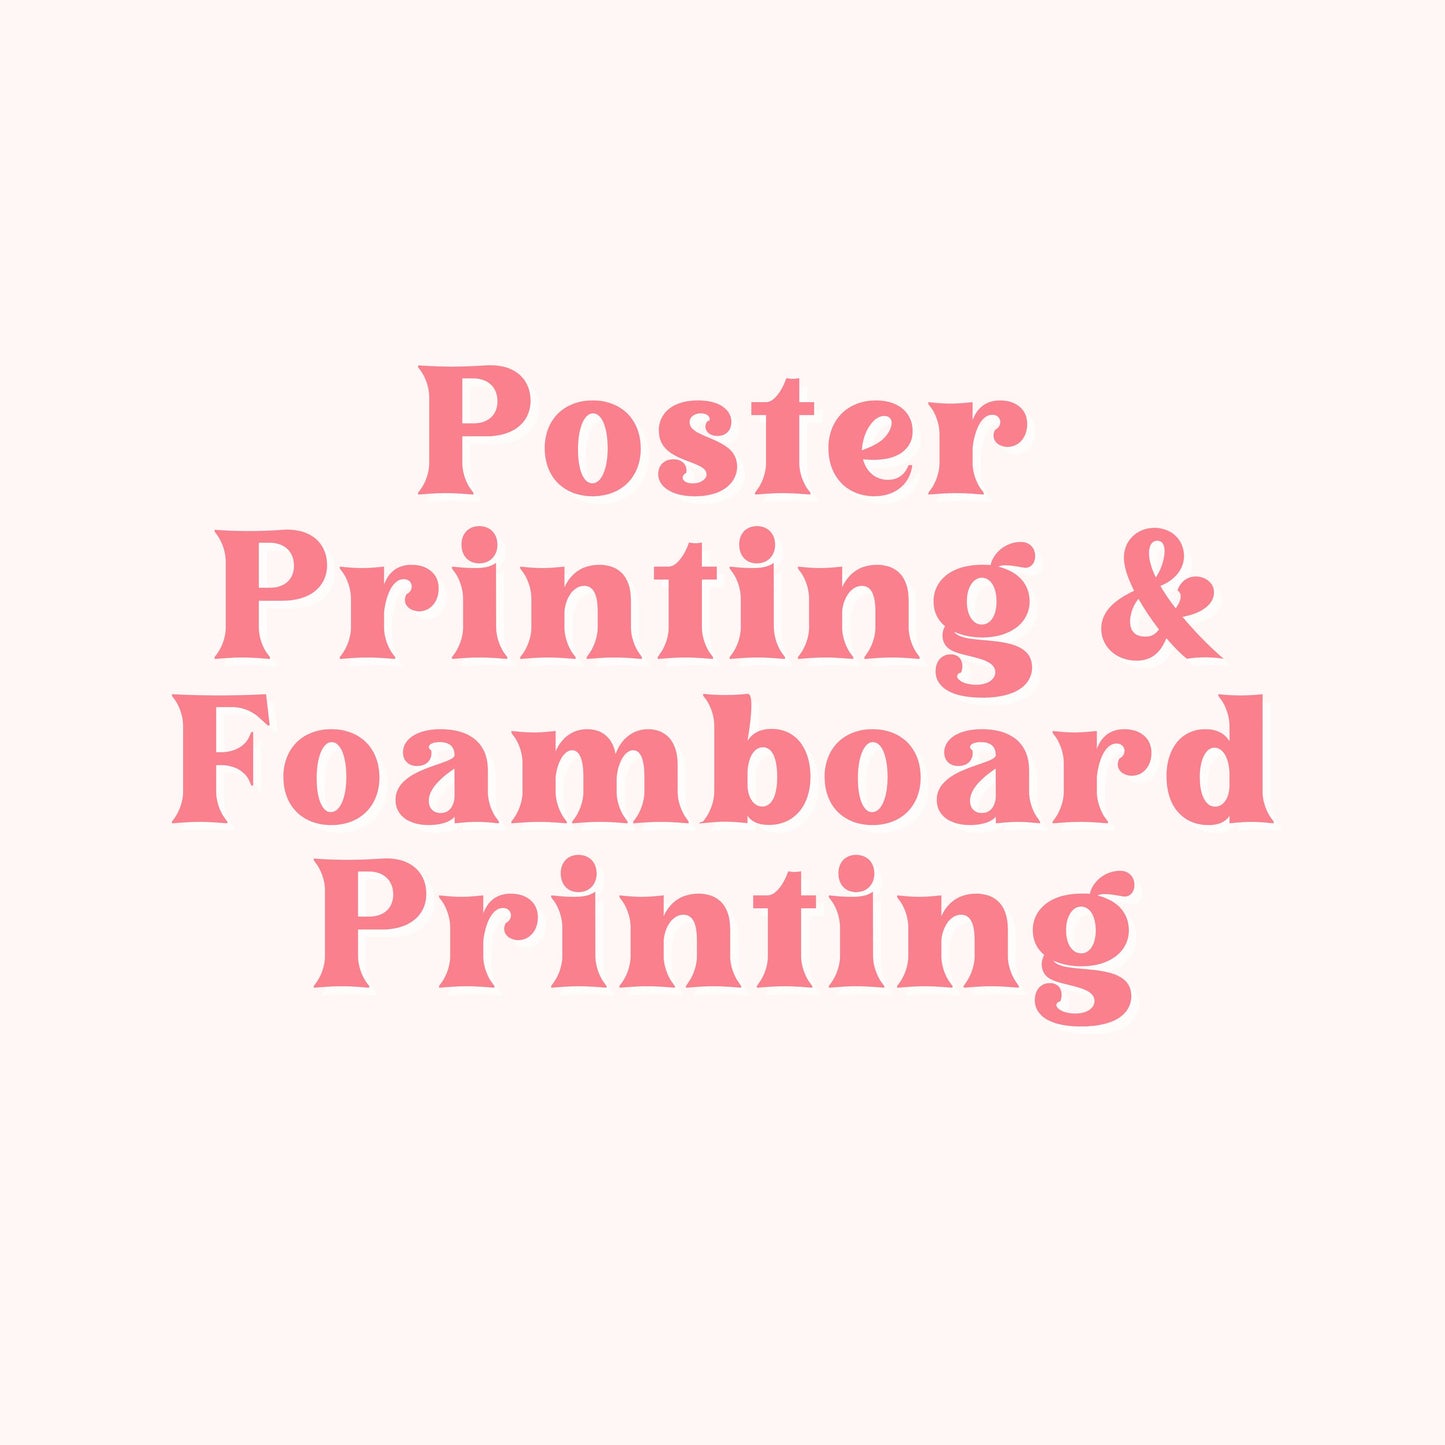 Printing Service for Digital Download from our ETSY Store